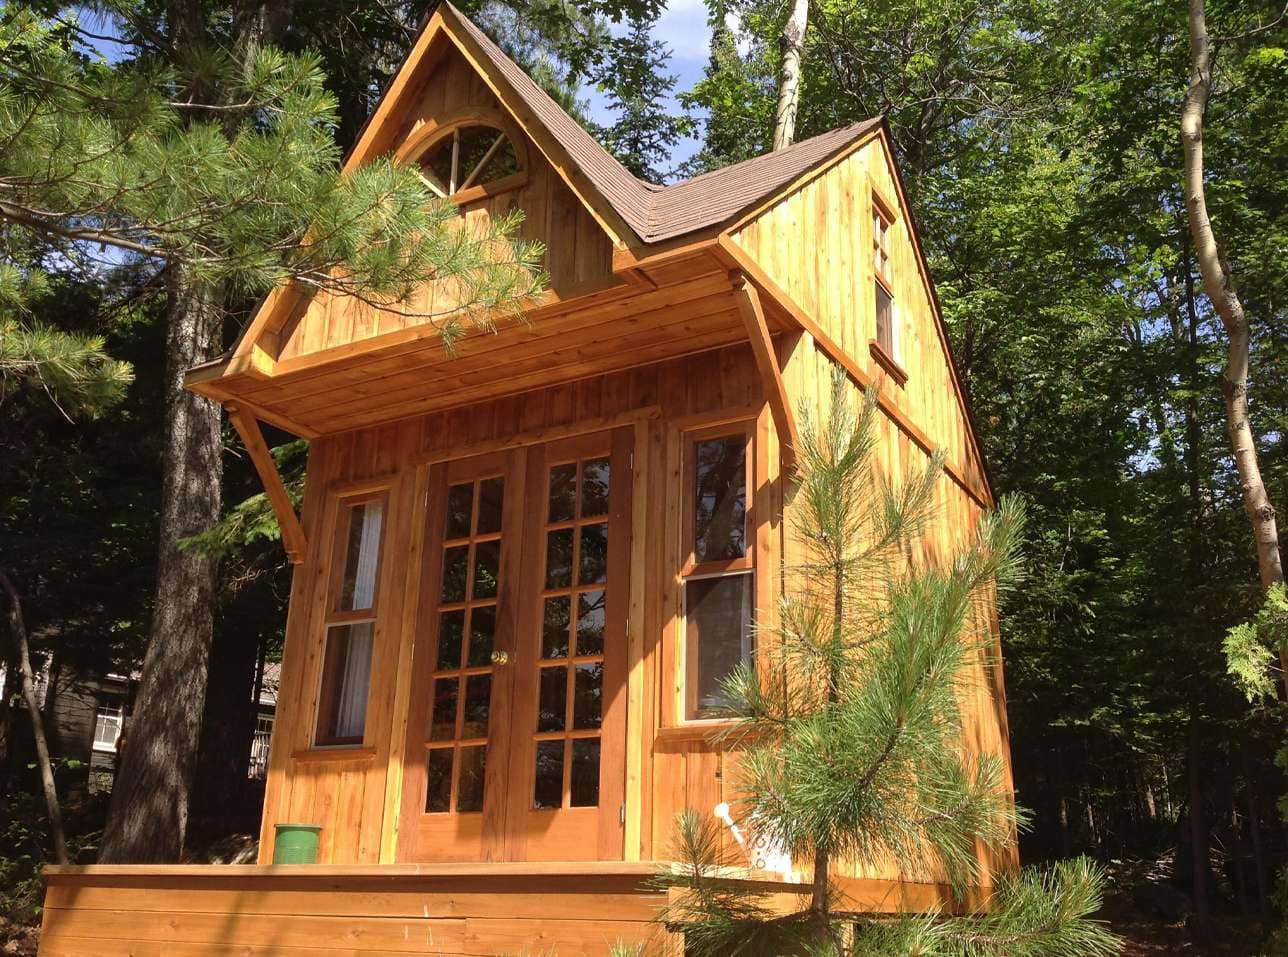 Prefab Bala bunkie kit 10 x 10 with pine loft in Temagami Ontario. ID Number 199643-3